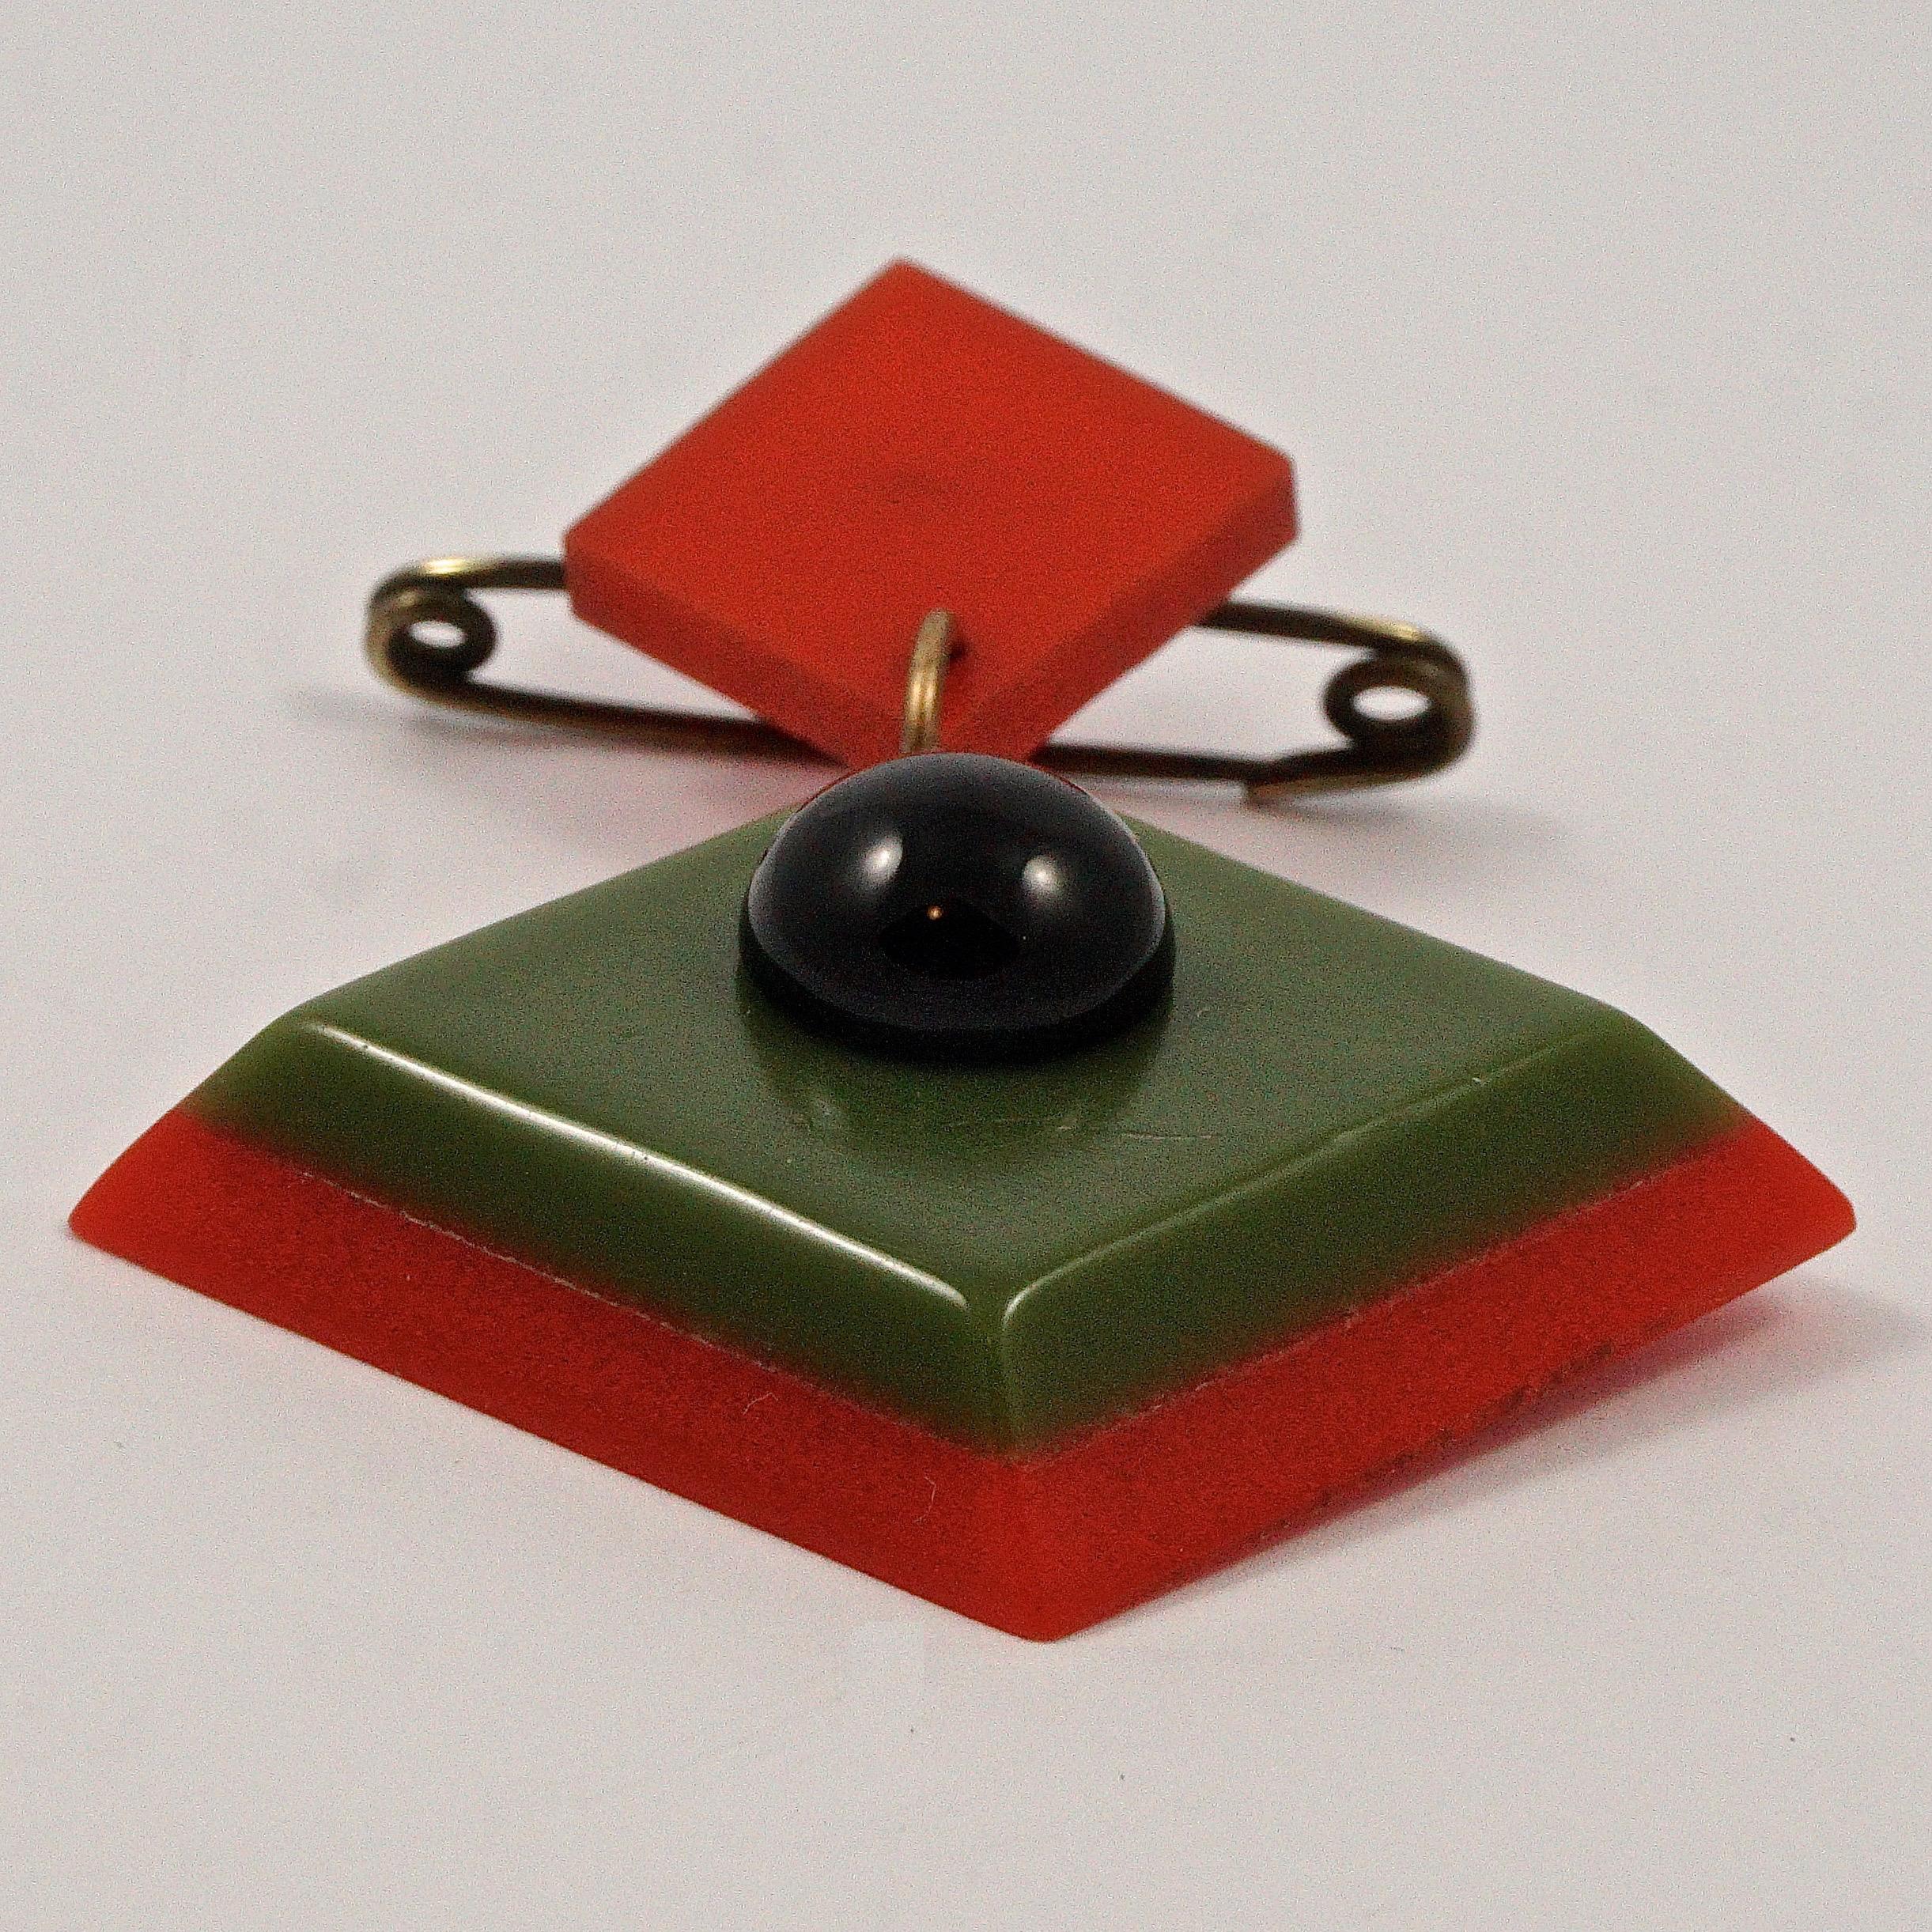 Wonderful Art Deco geometric brooch, featuring early plastic red and green squares, and a black glass dome. Measuring length 6.1cm / 2.4 inches by maximum width 4.45cm / 1.75 inches. The brooch is in very good condition, with some scratching.

This